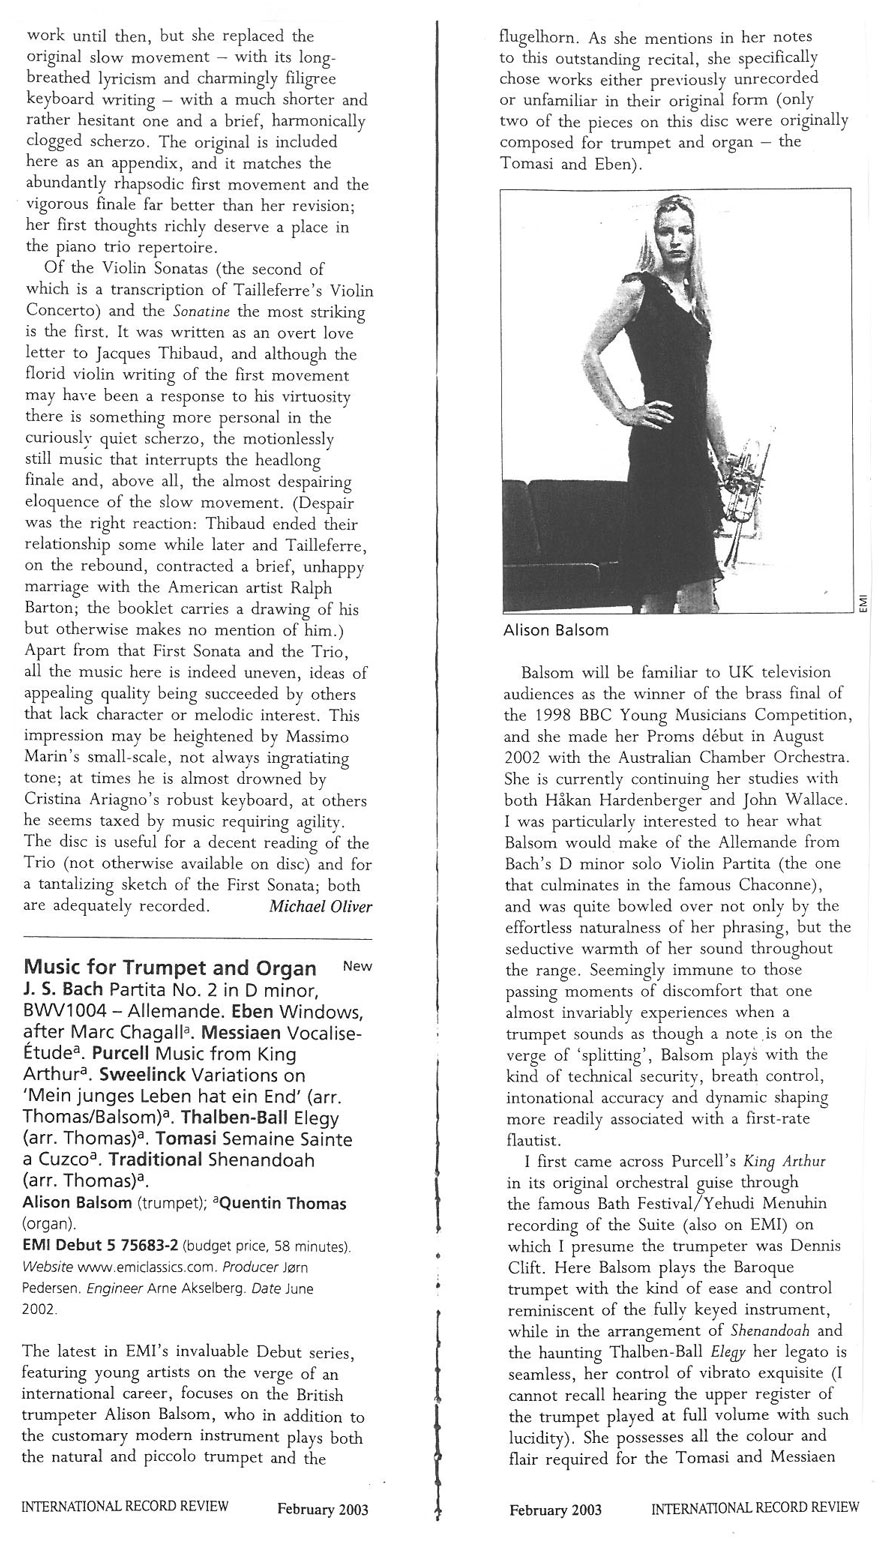 CD Review, 2003, International Record Review